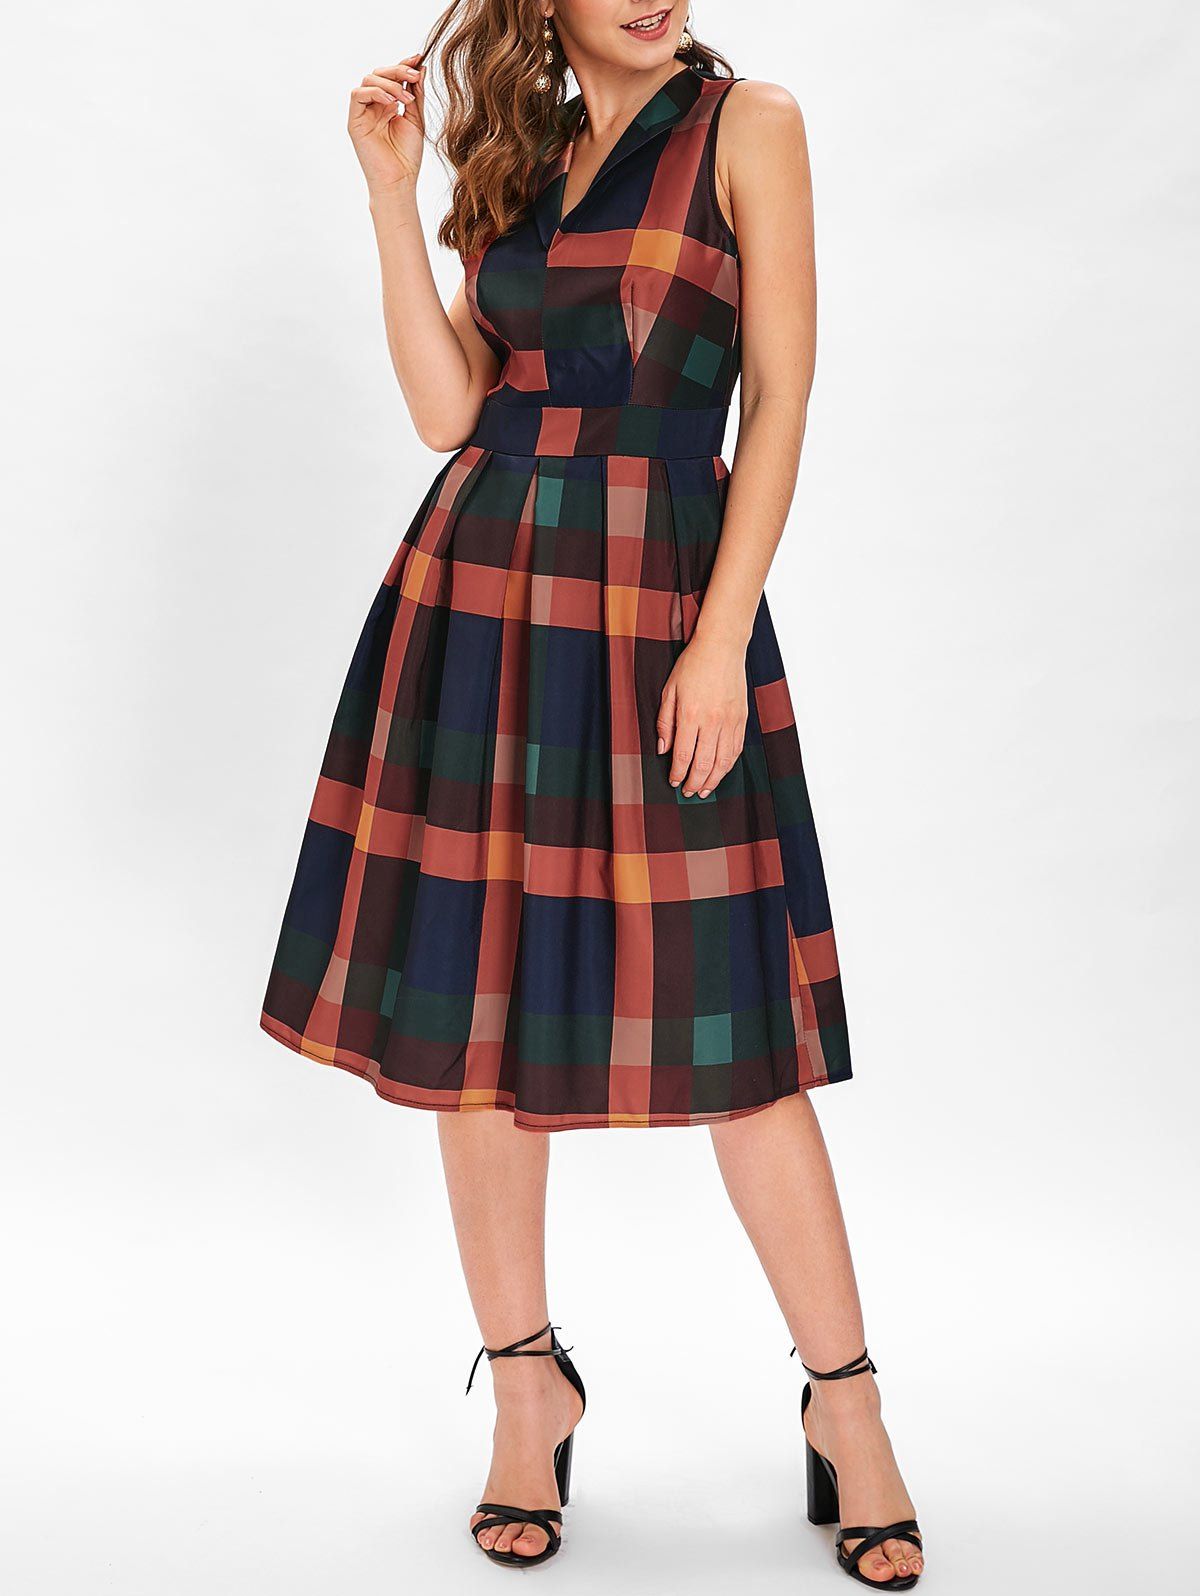 Sleeveless Checked Print A Line Dress - multicolor S